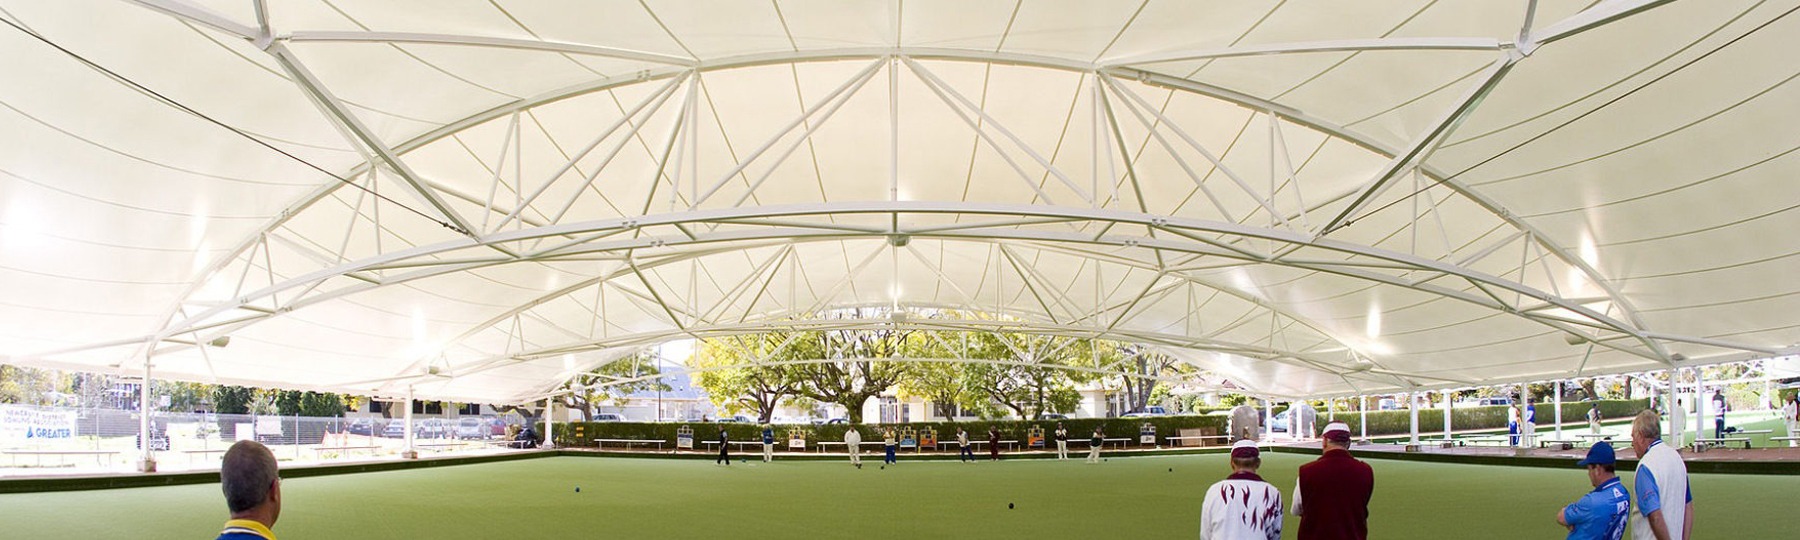 Shade to Order Australia | Raymond Terrace Bowling Club Shade Structures for bowling greens